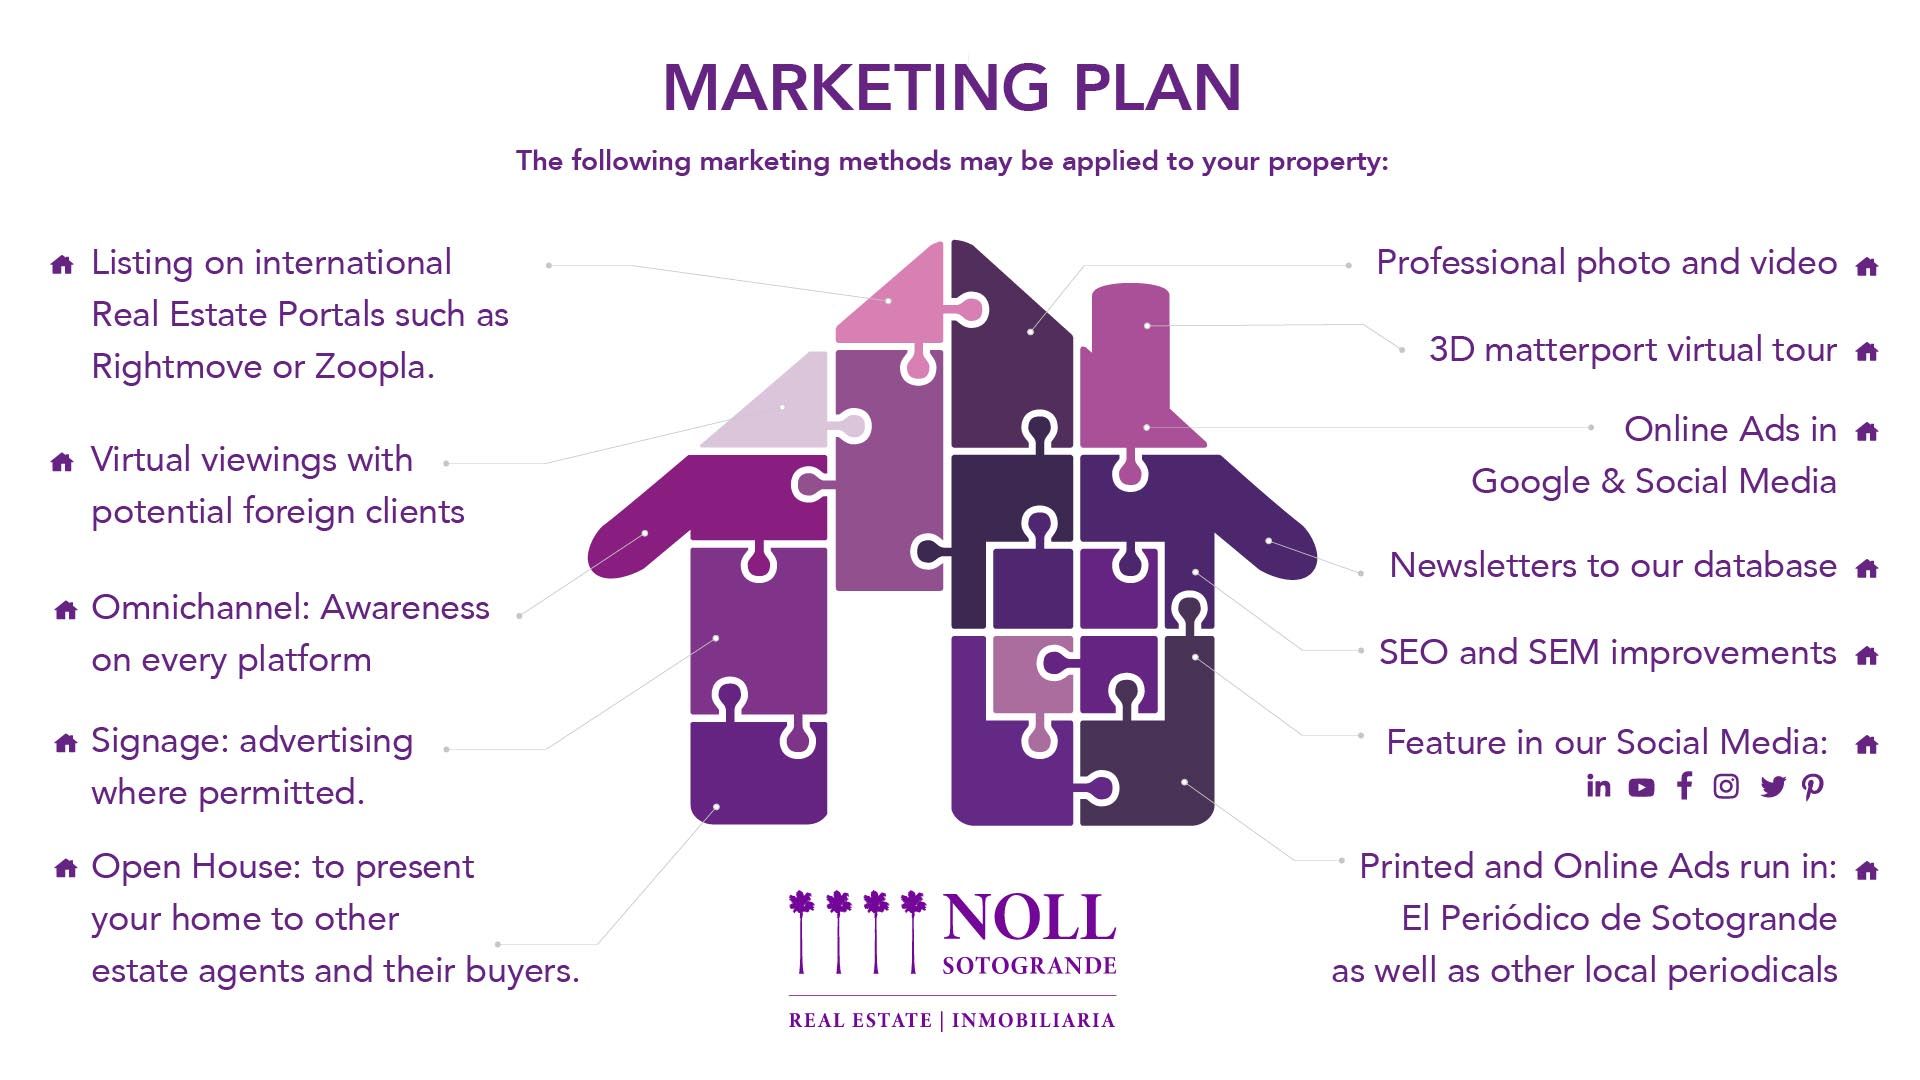 Noll Sotogrande Real Estate methods of marketing that can be applied to your Sotogrande Property.